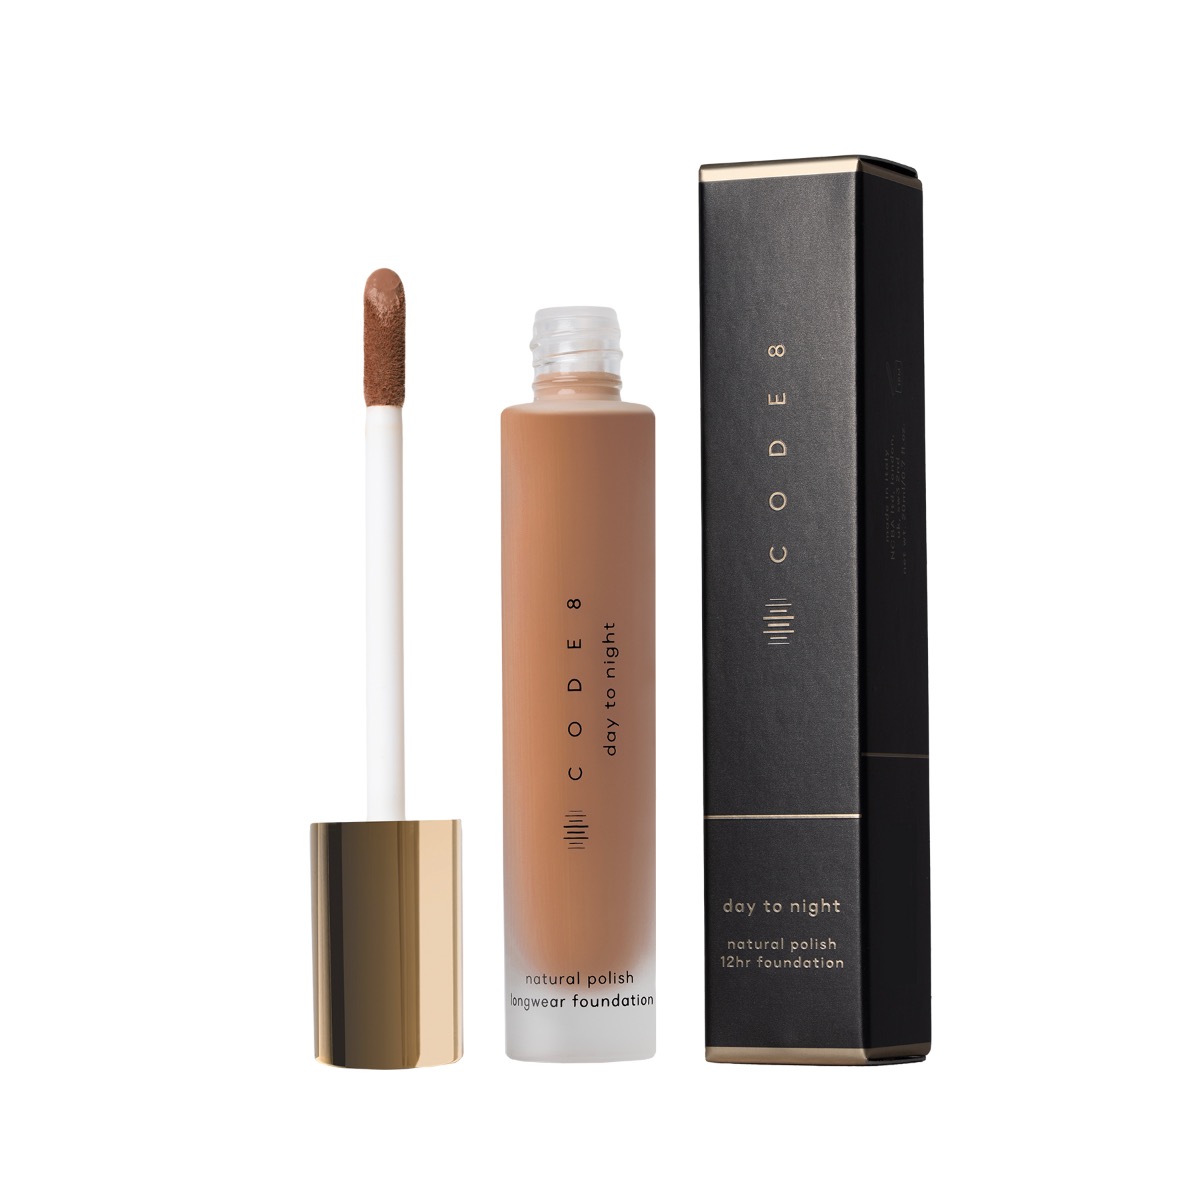 Day to Night Foundation by Code 8